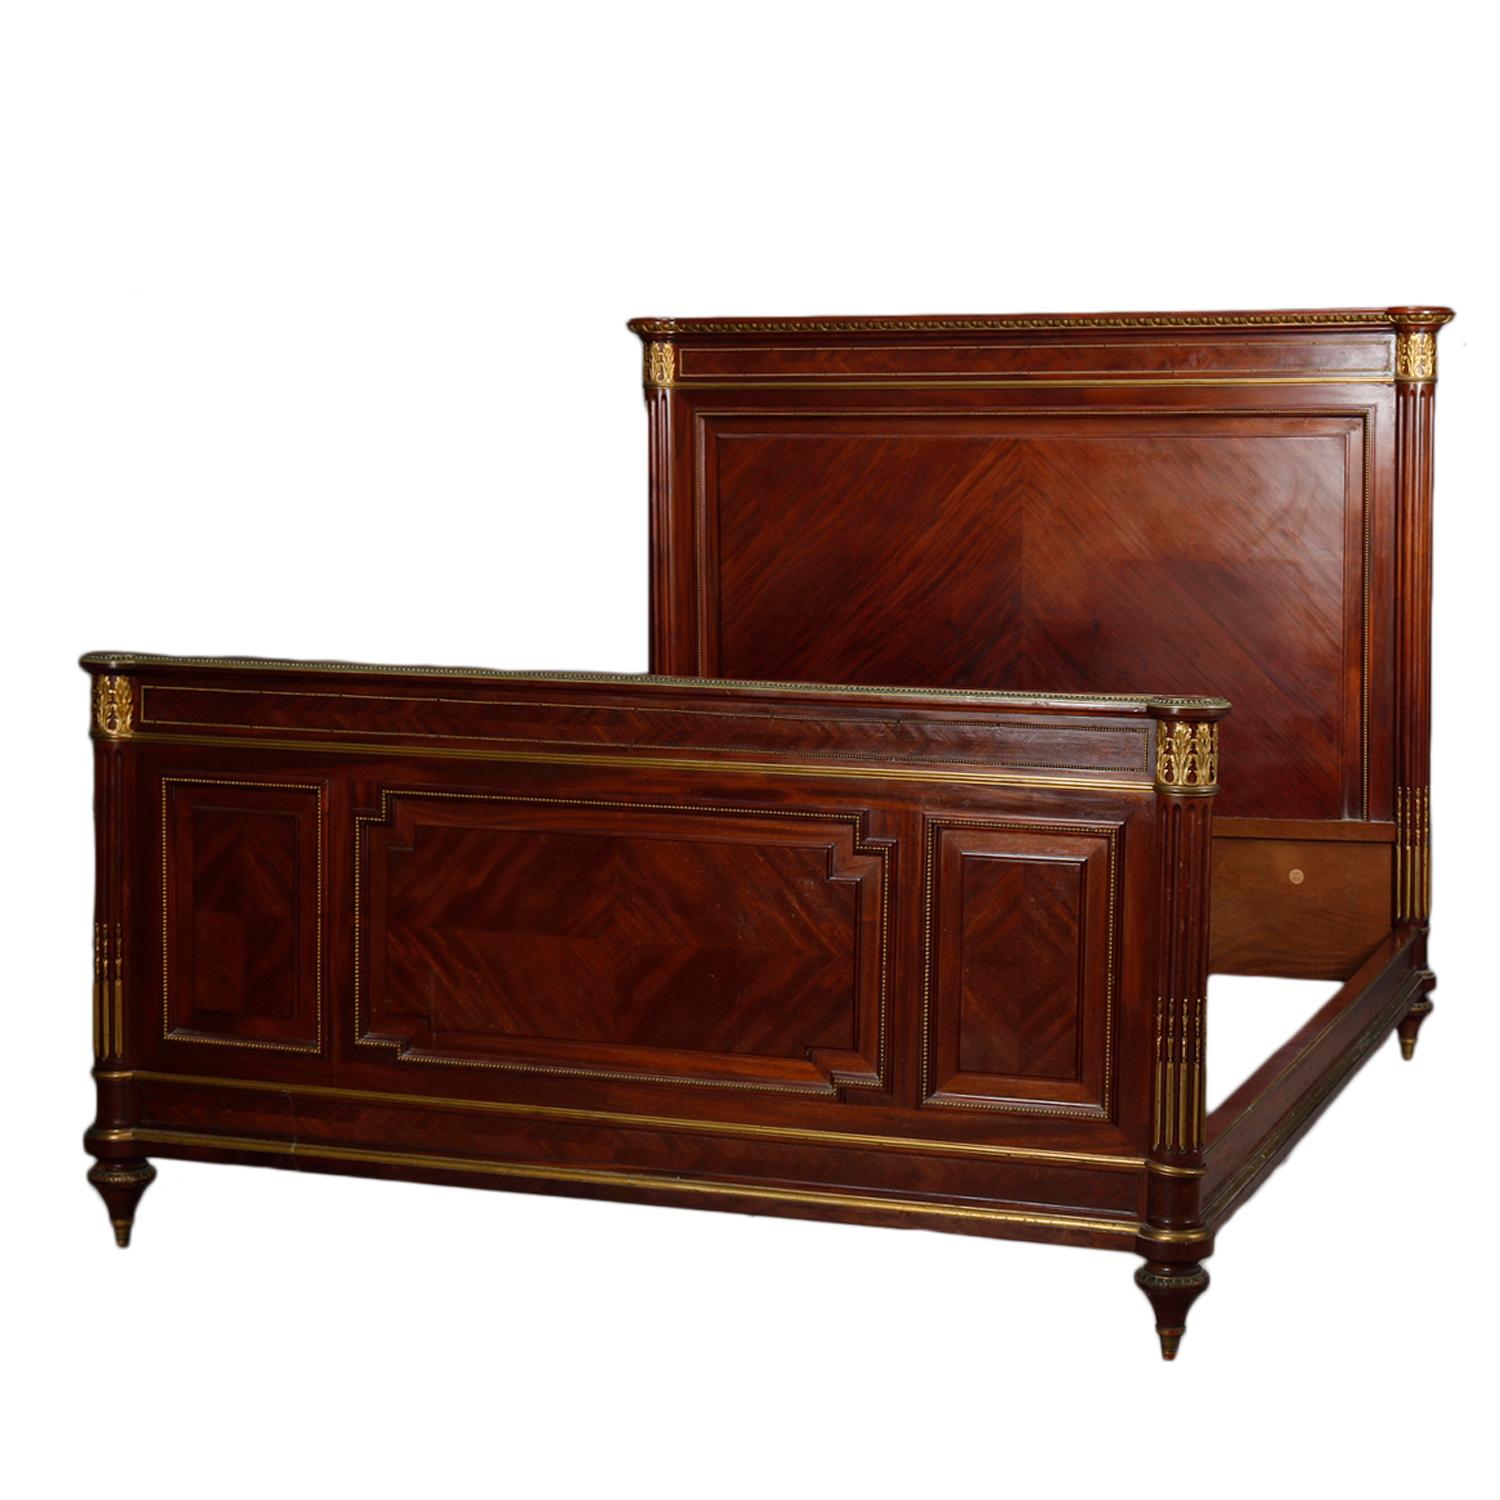 French Louis XVI mahogany Marquetry & ormolu bedroom suite includes:
1) Signed French Louis XVI chest of drawers by Francois Linke offers marble top surmounting mahogany case with parquetry facing and flanking column supports with four long